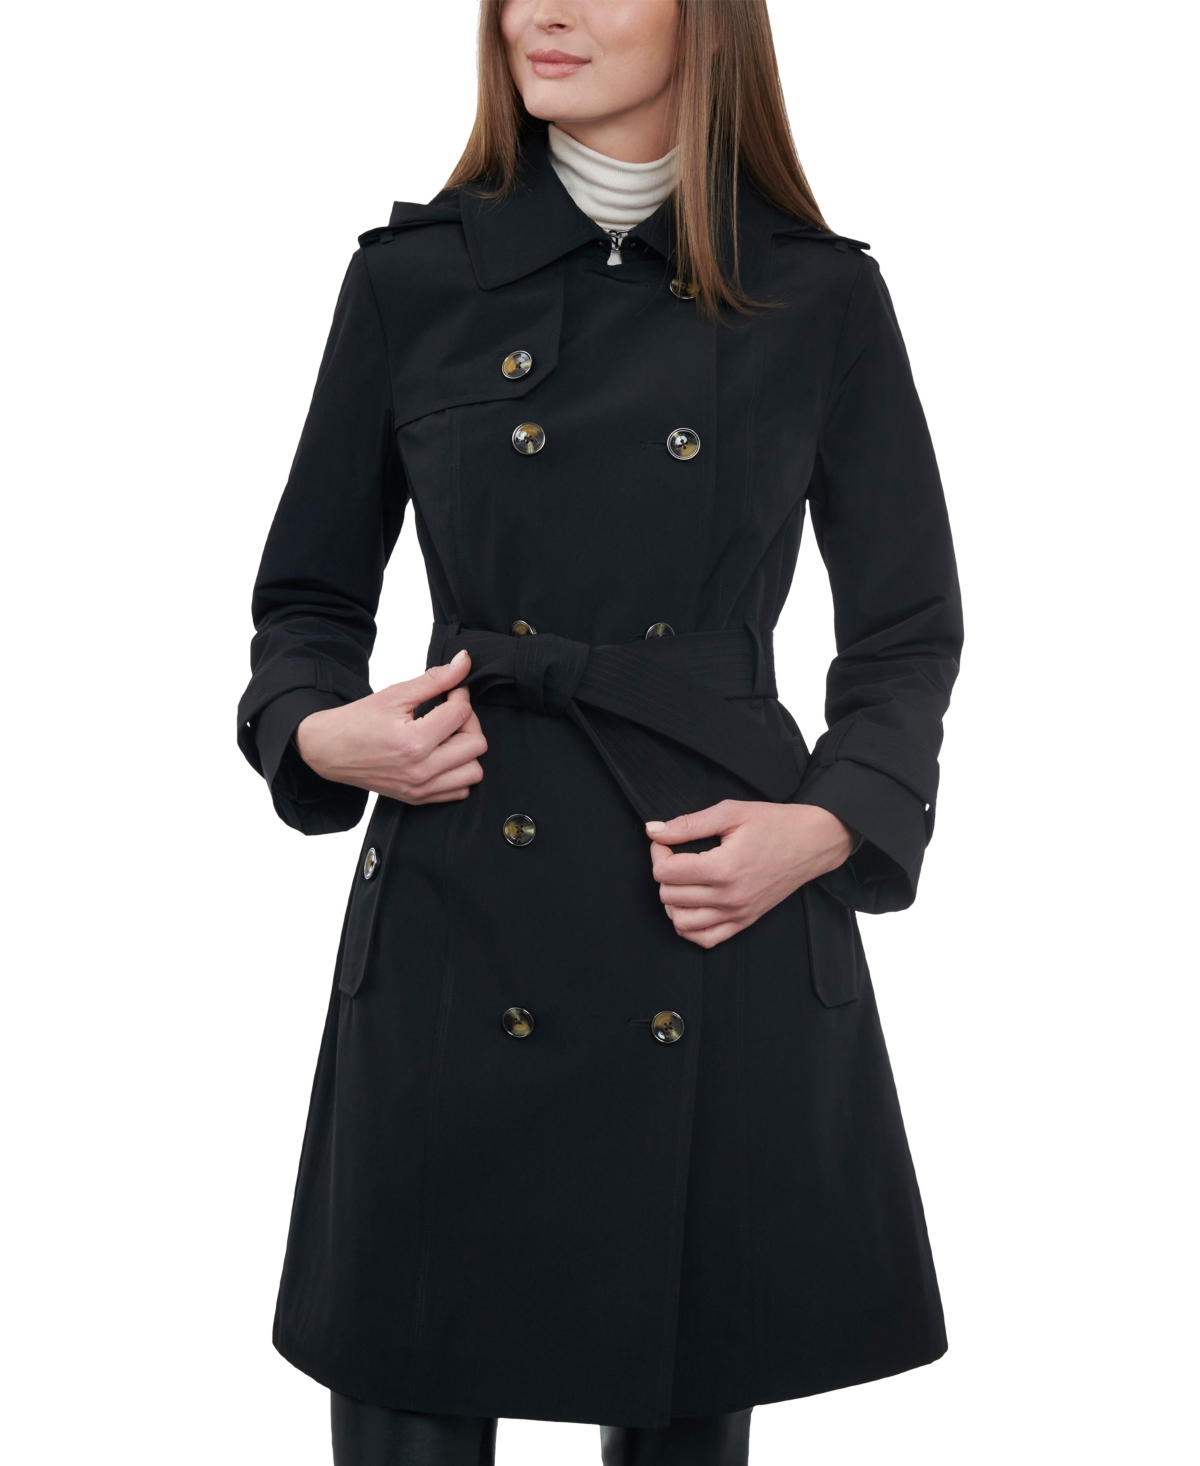 London Fog Women's 38" Double-Breasted Hooded Trench Coat